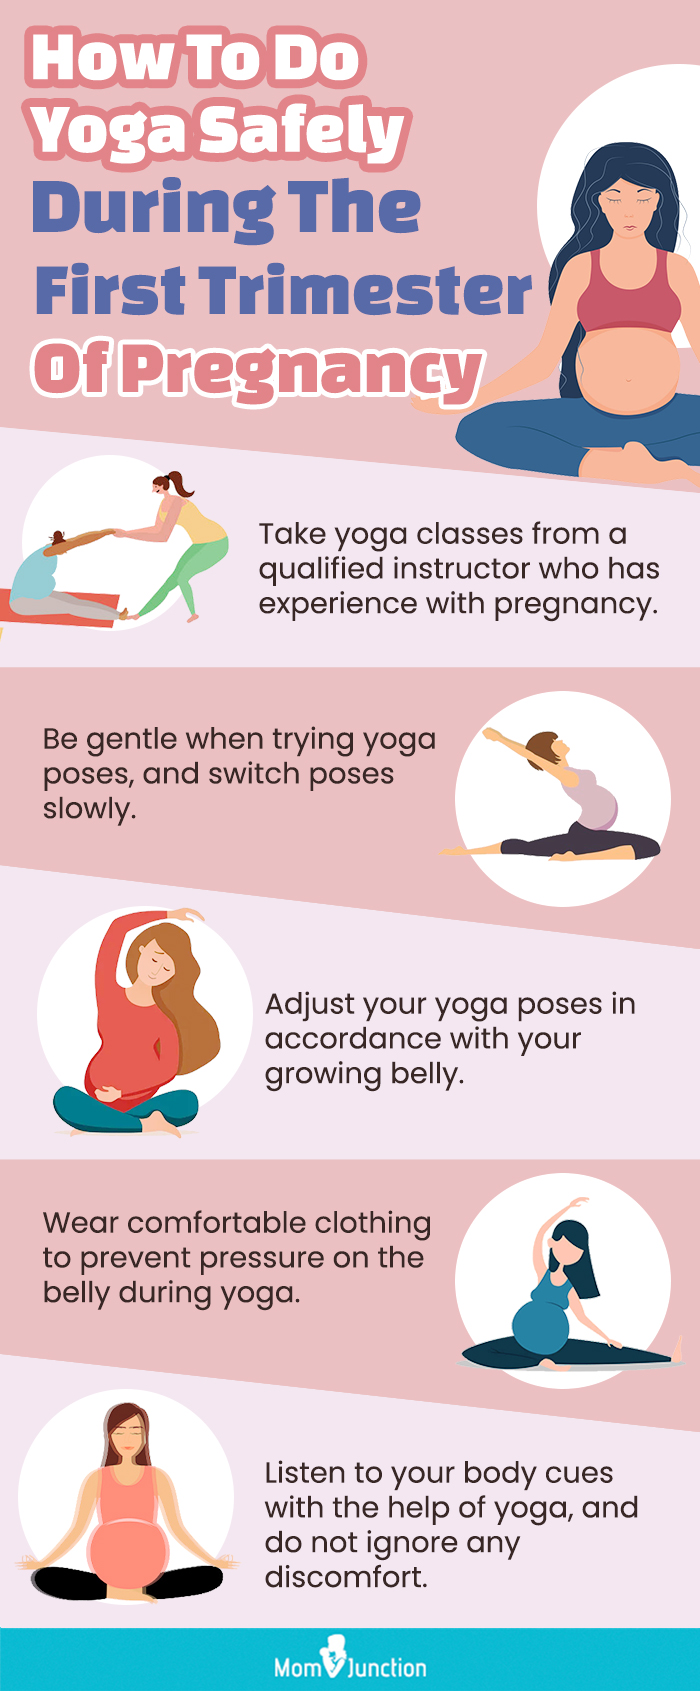 how to do yoga safely during the first trimester of pregnancy (infographic)